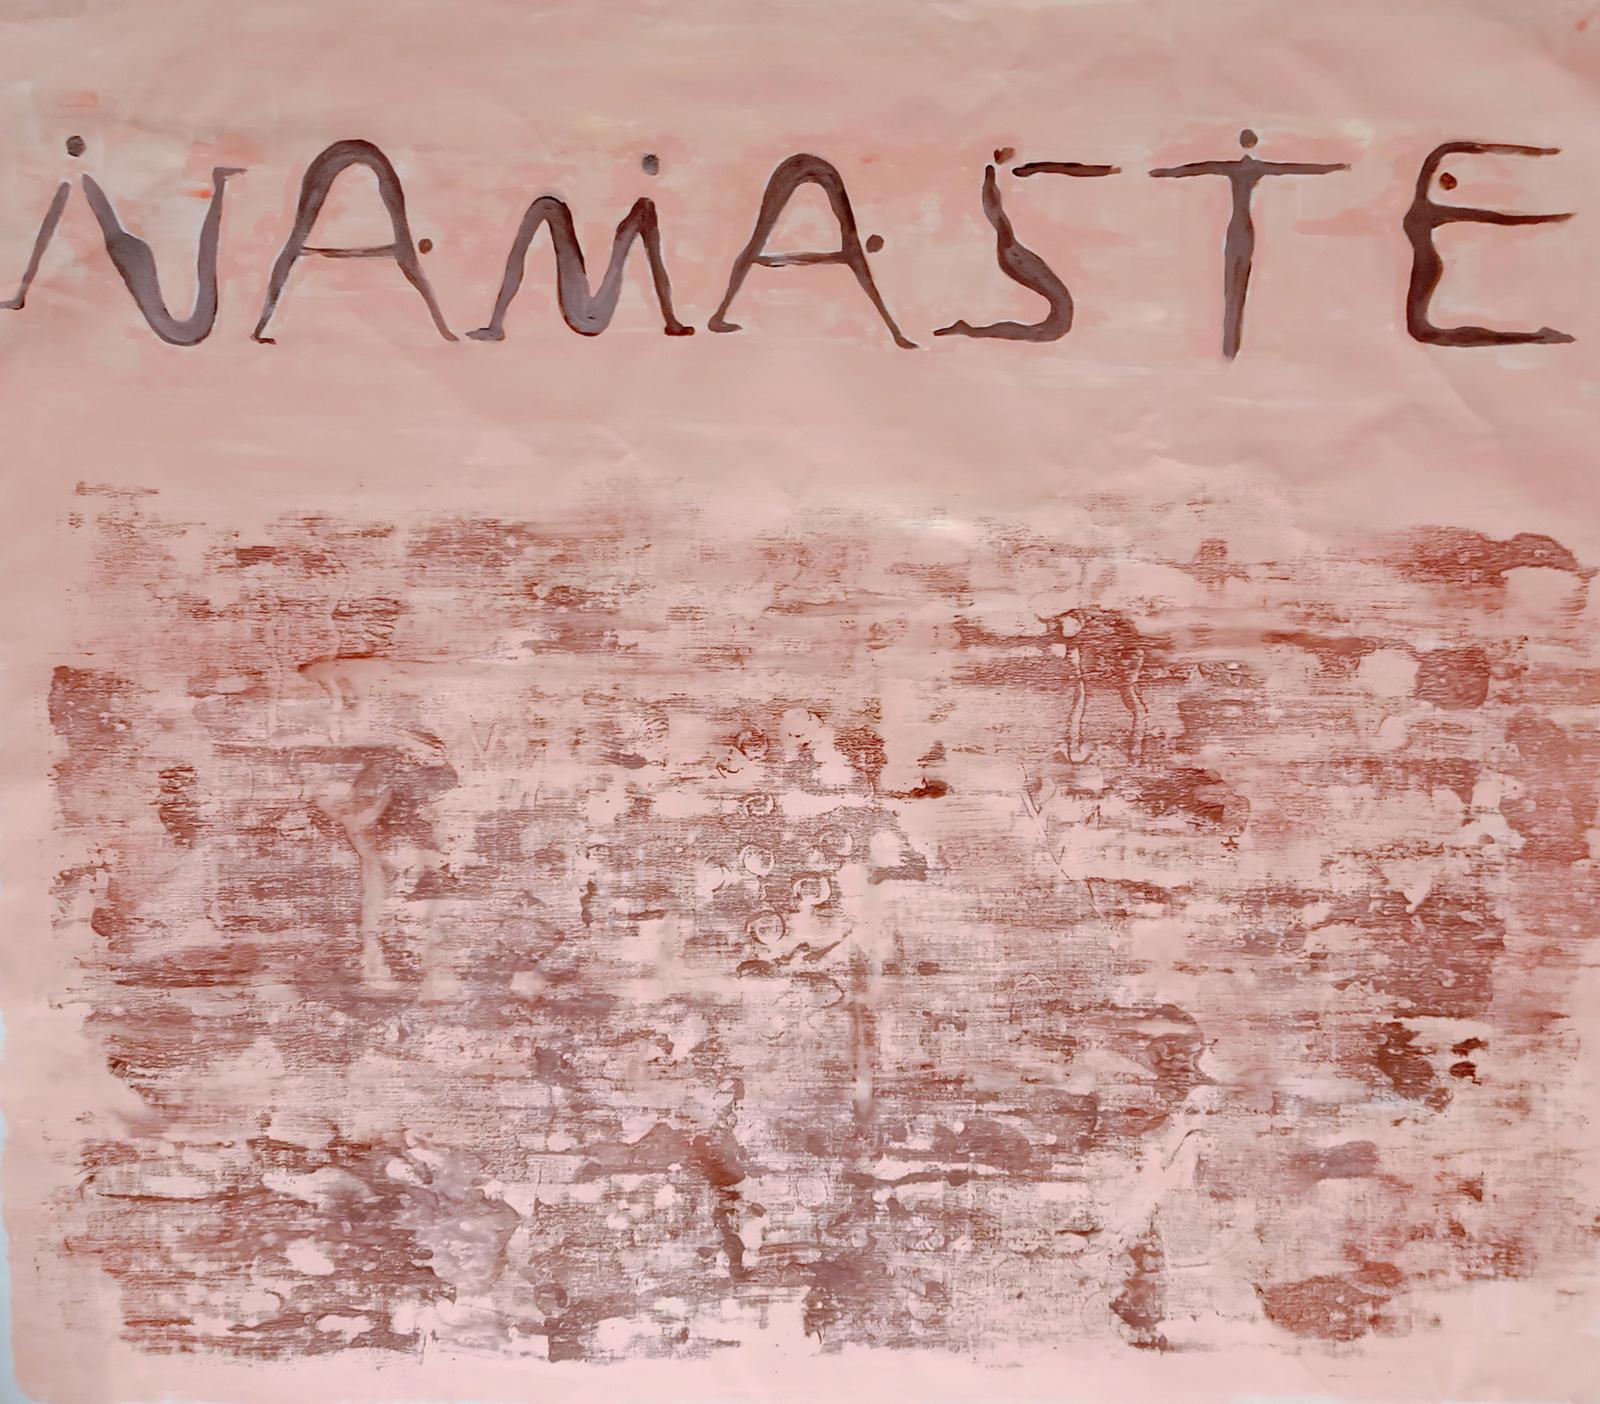 Abstract Expressionist painting- Namaste